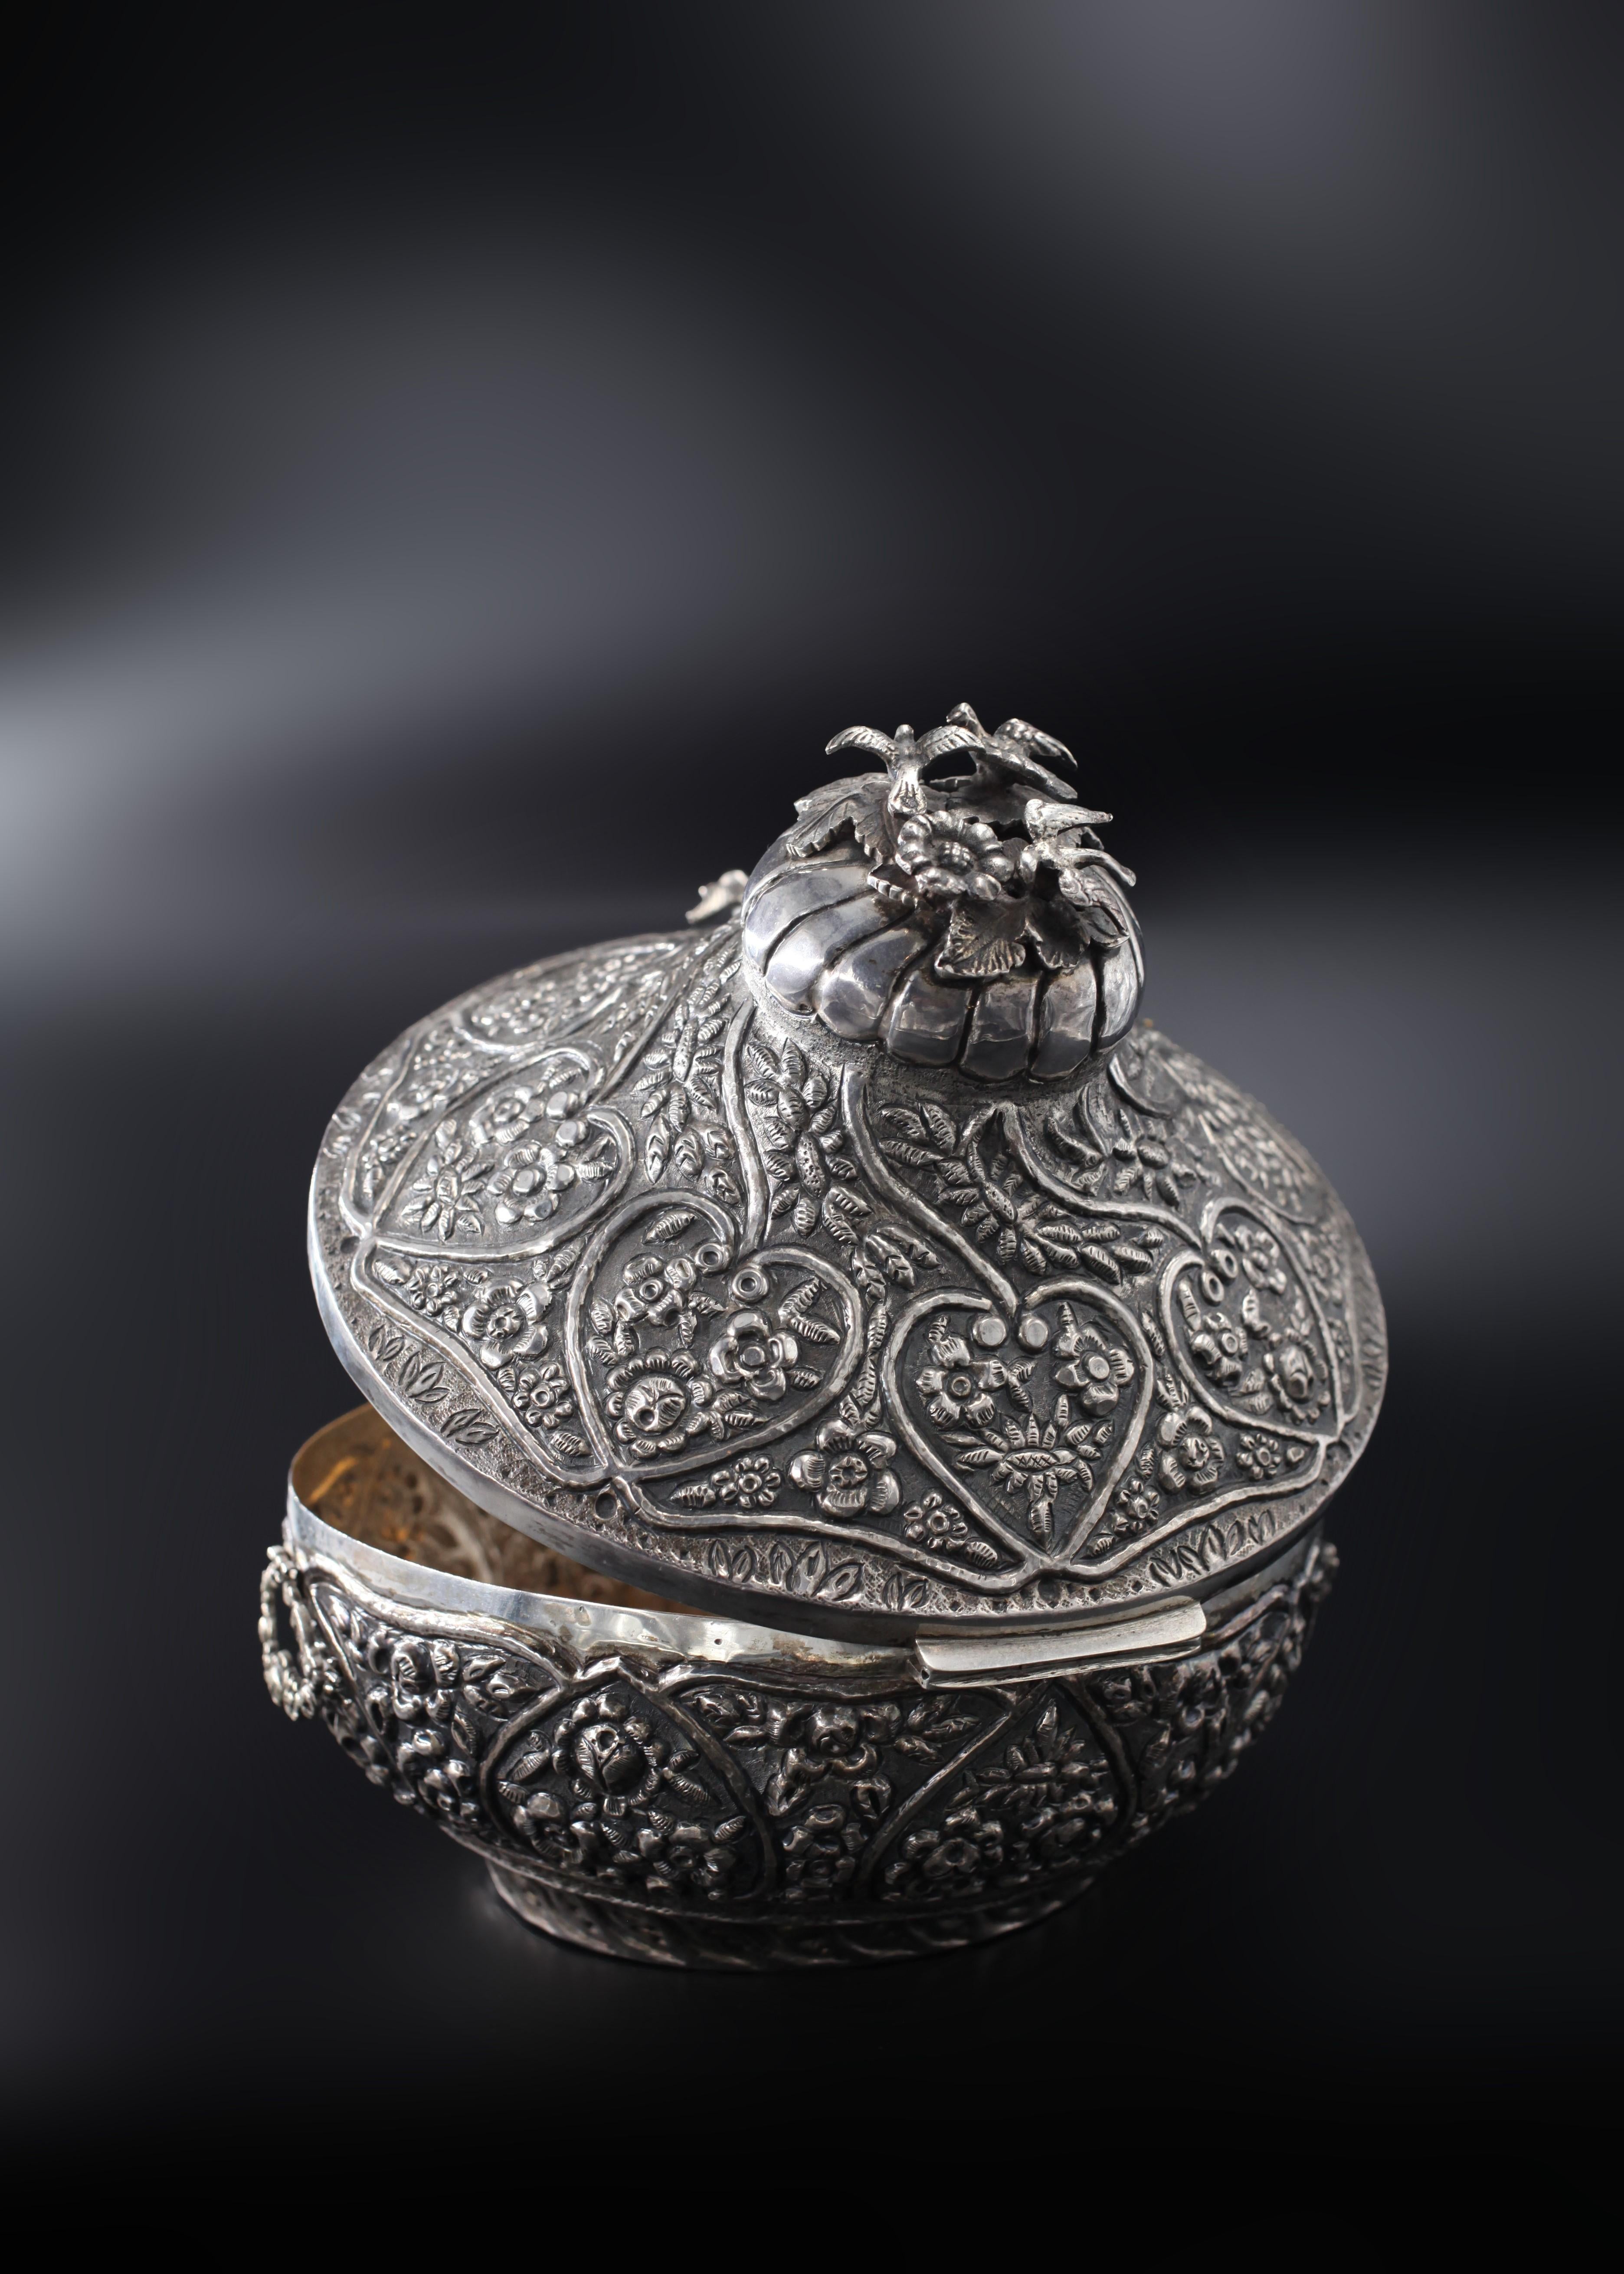 One can get lost in the endless details within this piece's chiseled and embossed detailing. Each of the features on this Turkish Silver Wedding Box is like a mini vignette, displaying the remarkable craftsmanship of silversmiths during the Ottoman